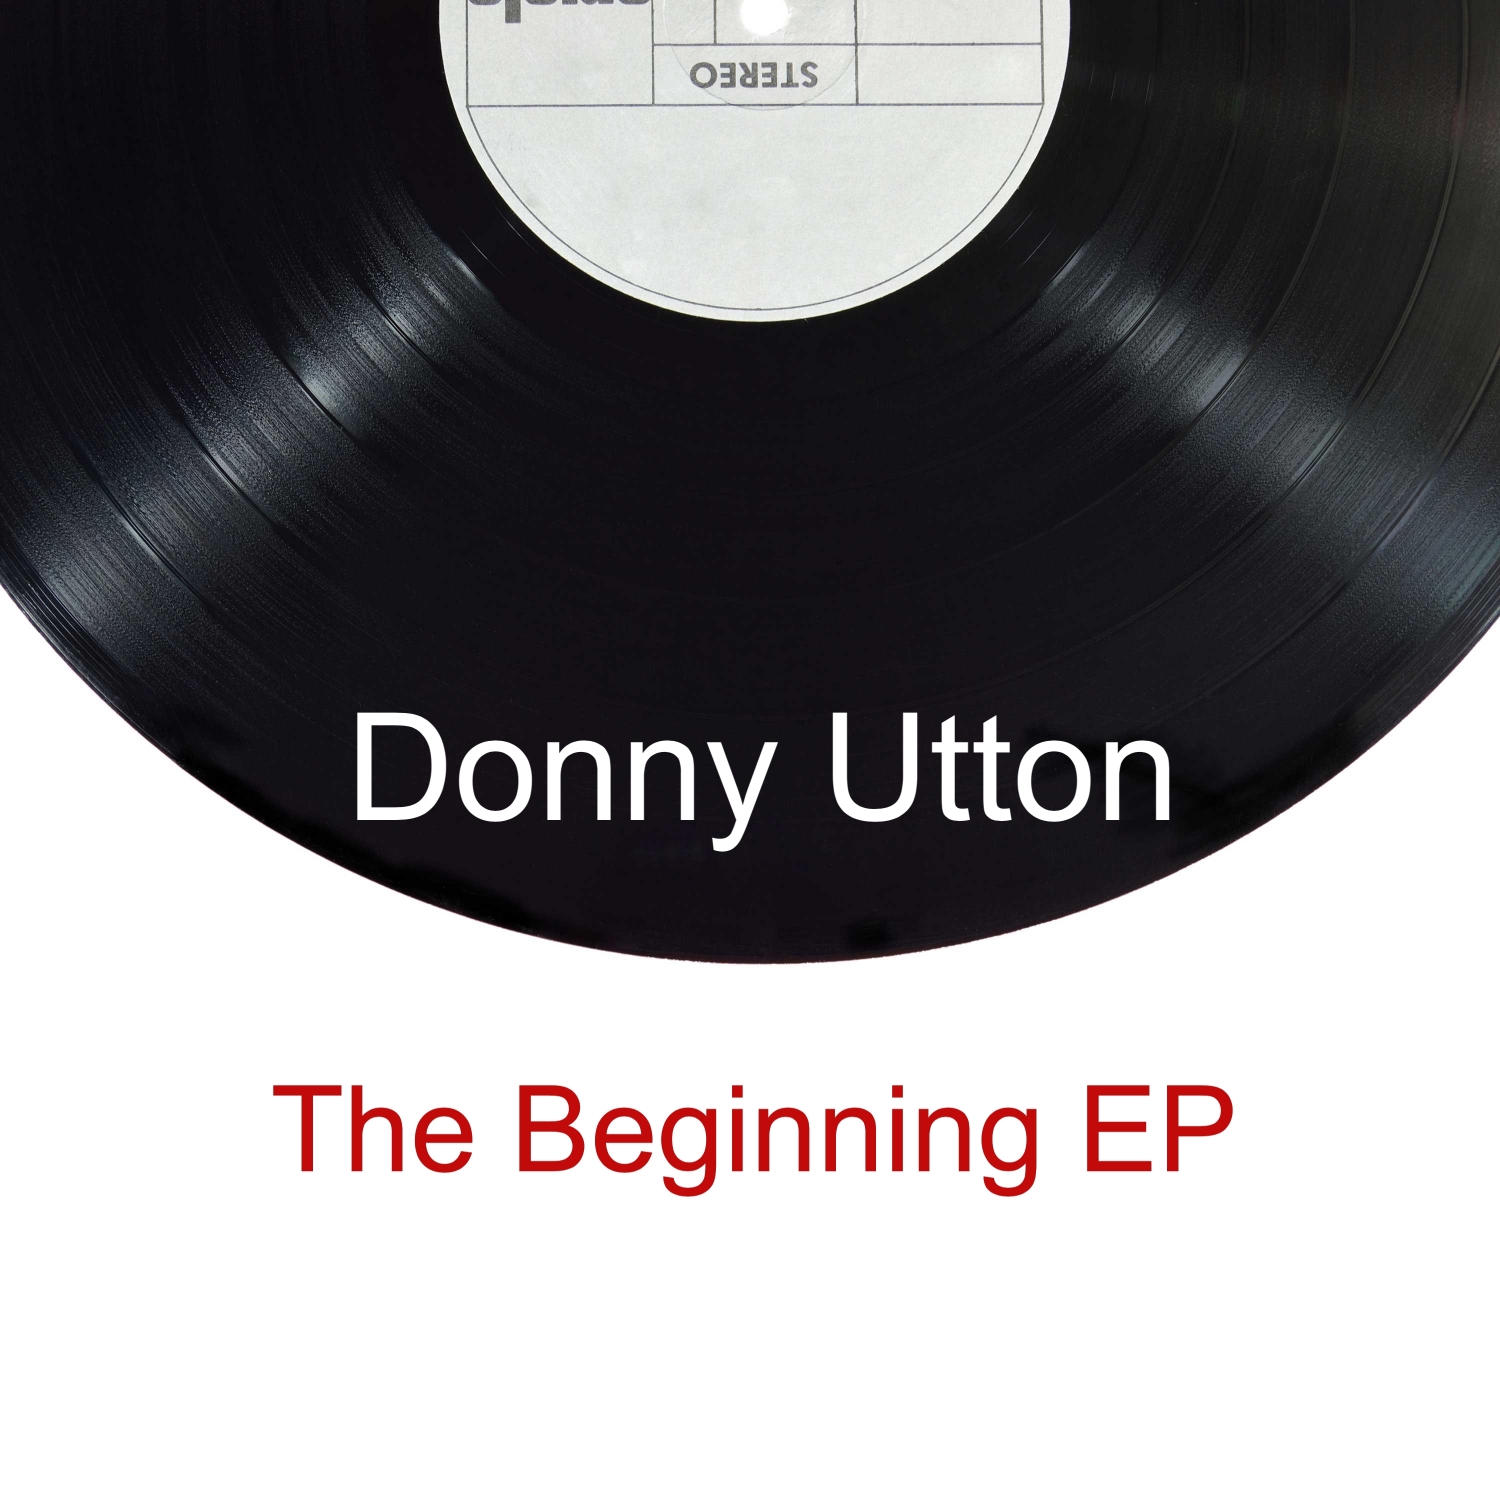 Donny Utton - The Beginning EP